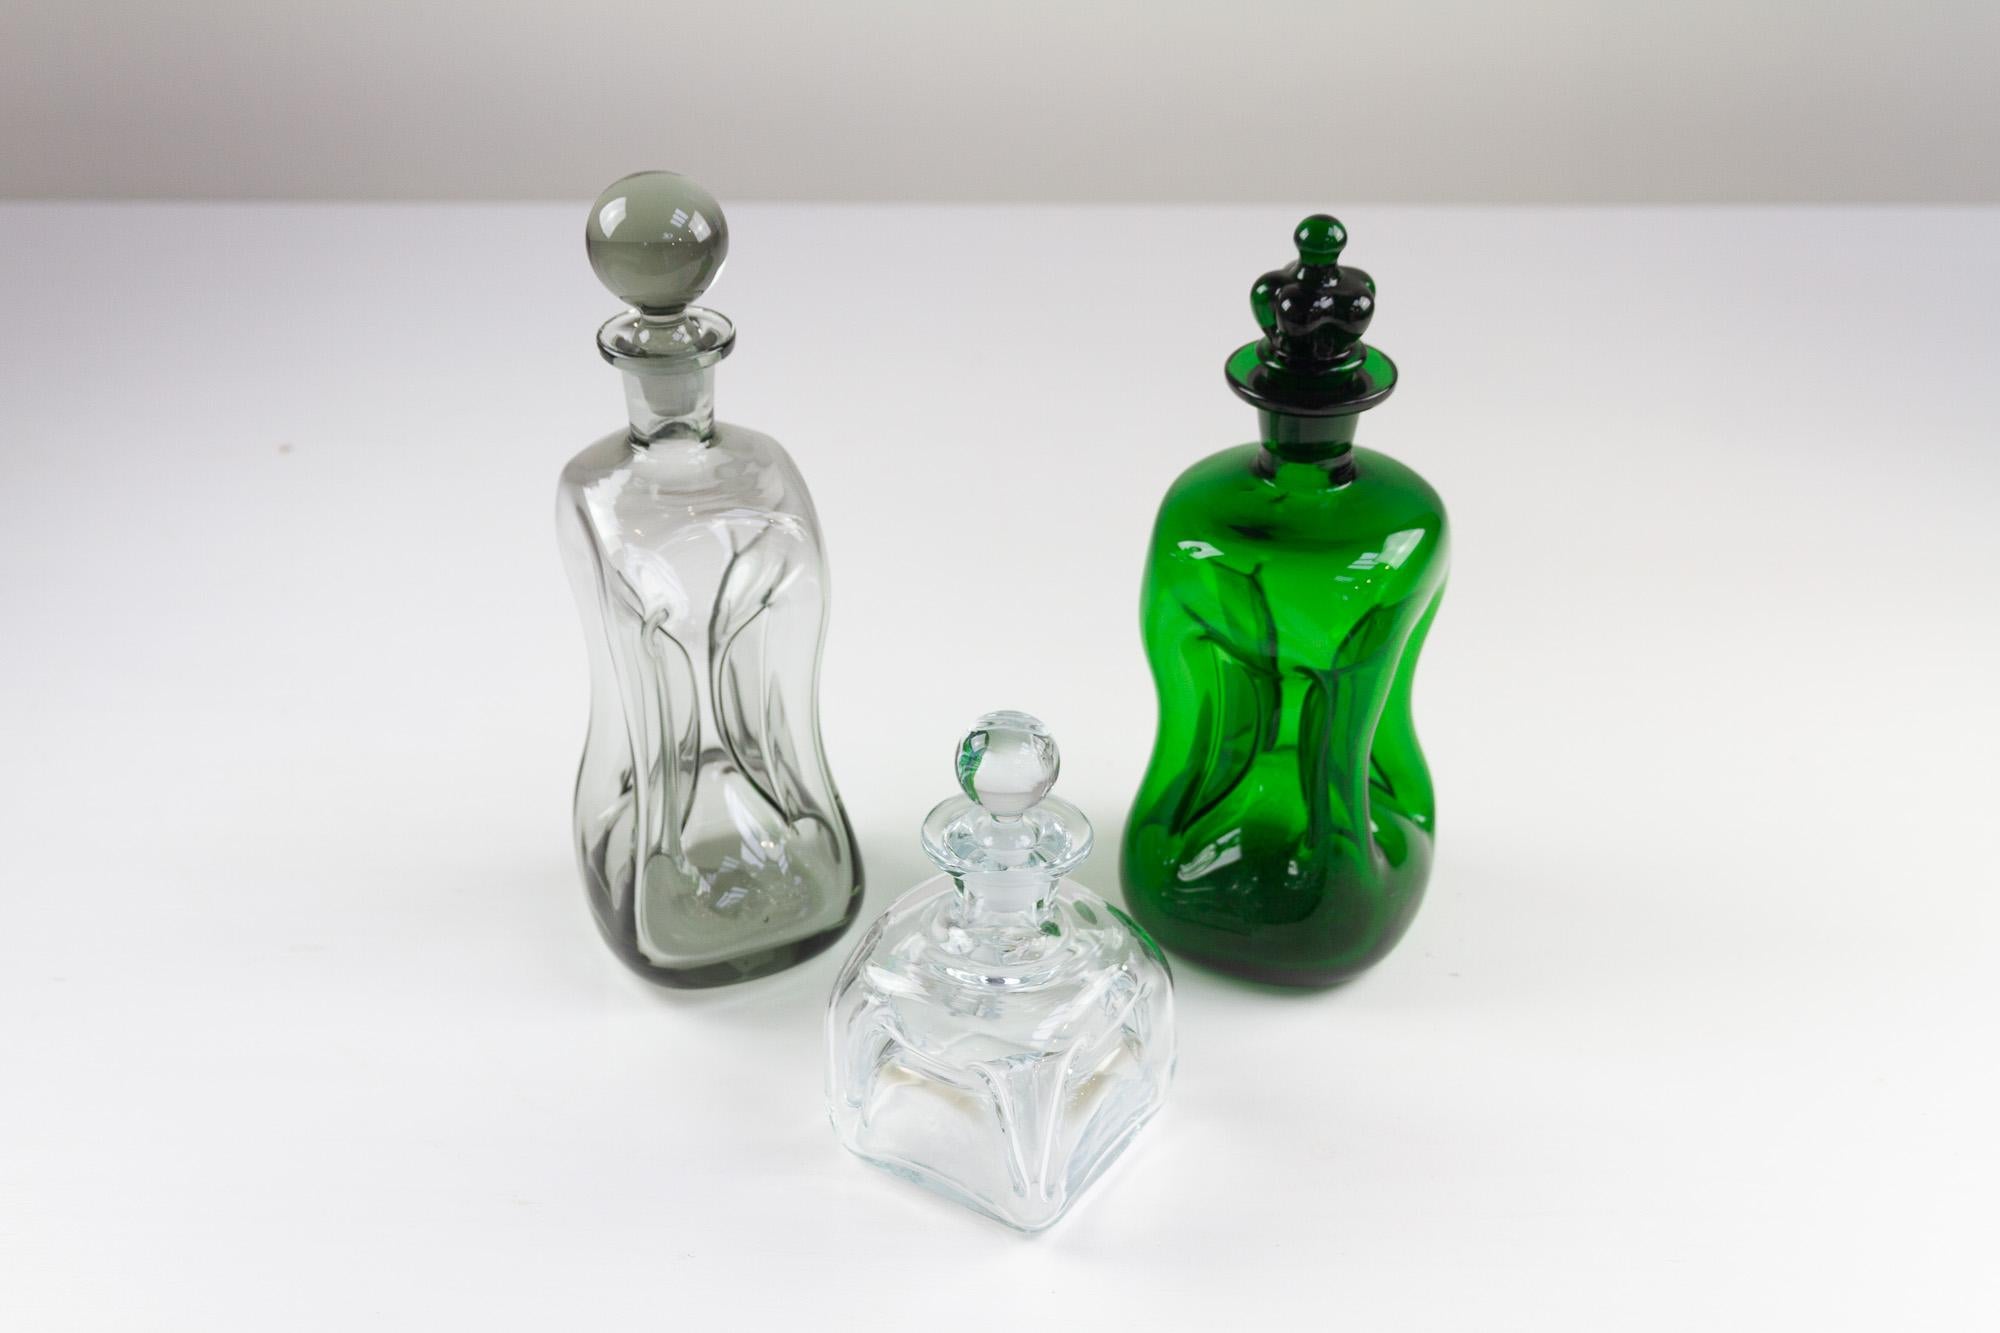 Vintage Danish Kluk Kluk Decanters by Holmegaard, Set of 3.
Set of three hand blown Kluk Kluk decanters from Holmegaard, Denmark 1950s to 1970s. These type of bottles makes a clucking sound when pouring, hence the name cluck cluck.

This set